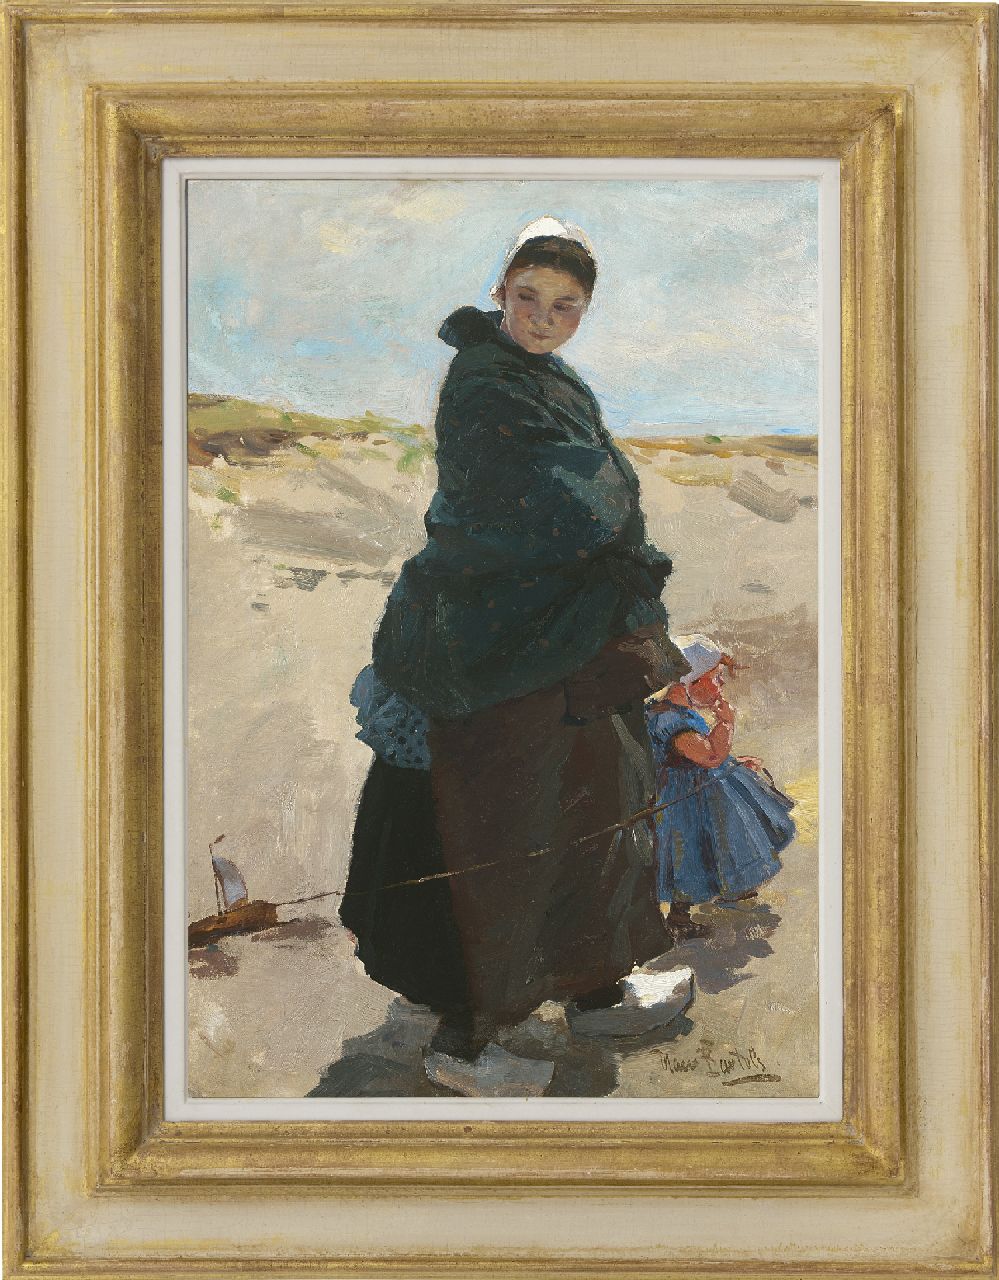 Bartels H. von | Hans von Bartels, Reverie: a fisherman's wife with her child on the beach of Katwijk, oil on canvas 47.6 x 33.3 cm, signed l.r.